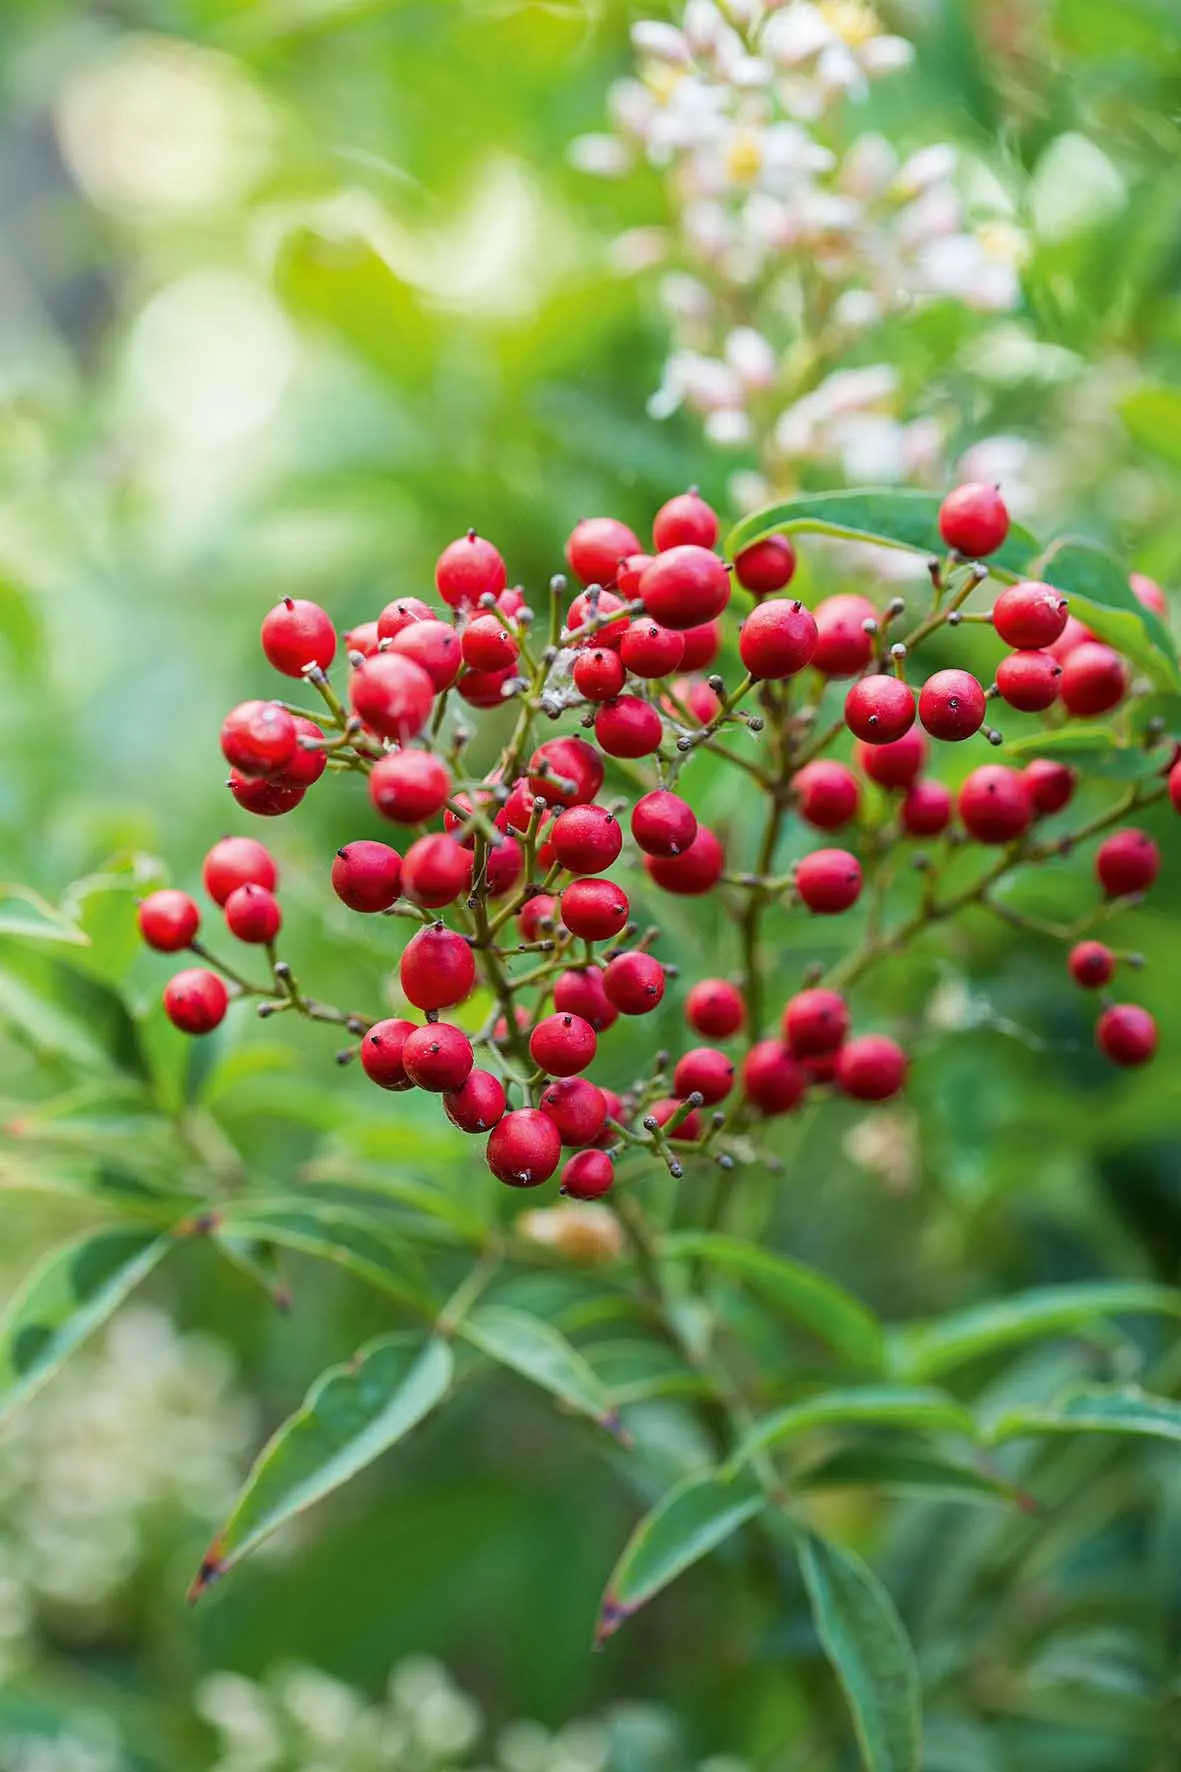 The red berries of Nandina domestica, which in this sheltered city garden start to appear in midsummer alongside the white flowers